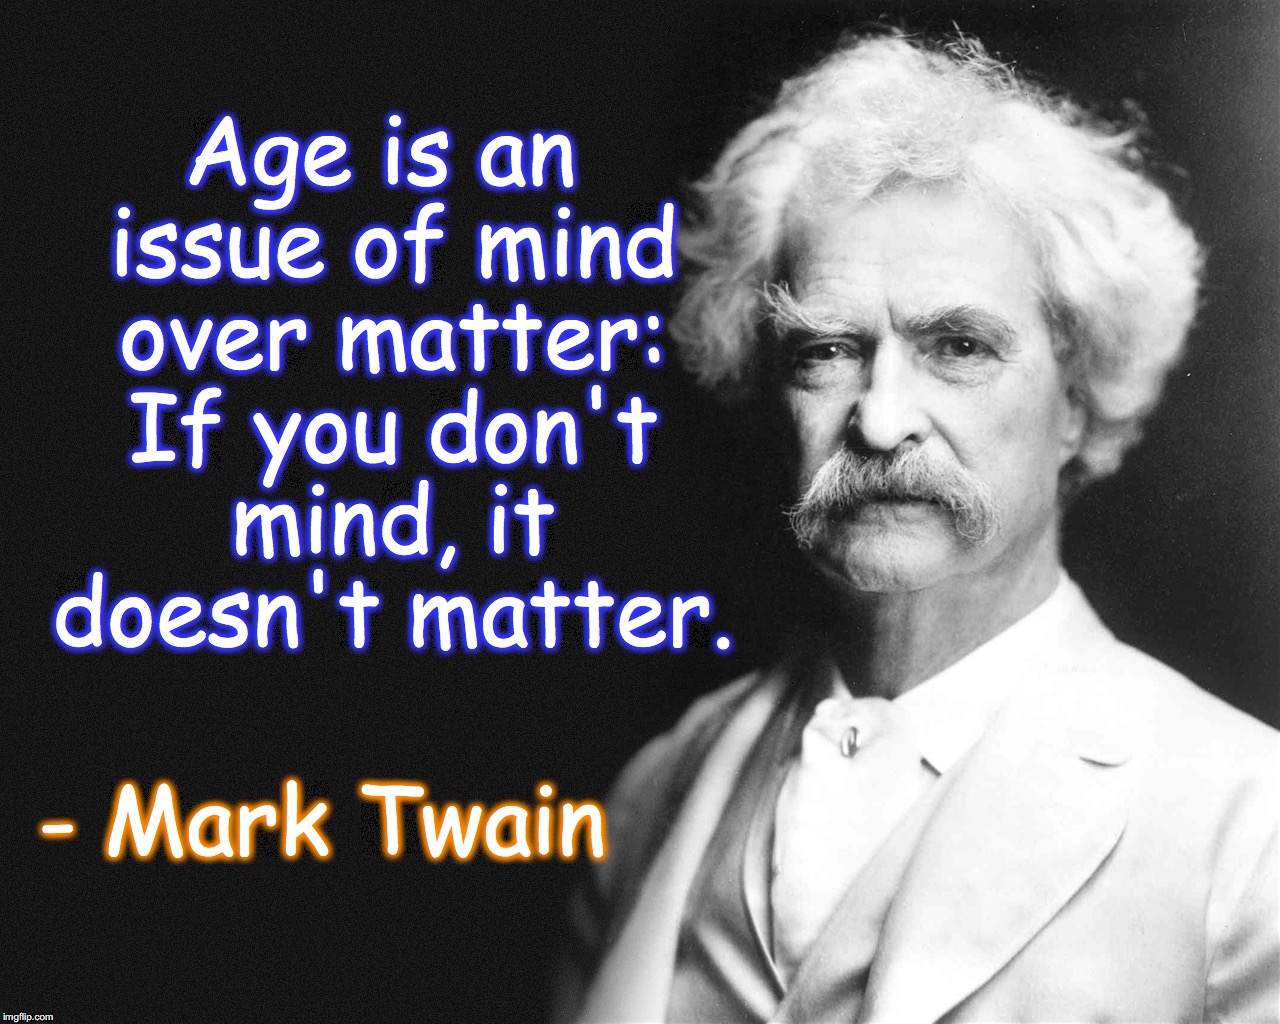 Age is an issue of mind over matter: If you don't mind, it doesn't matter. - Mark Twain | image tagged in mark twain,old | made w/ Imgflip meme maker